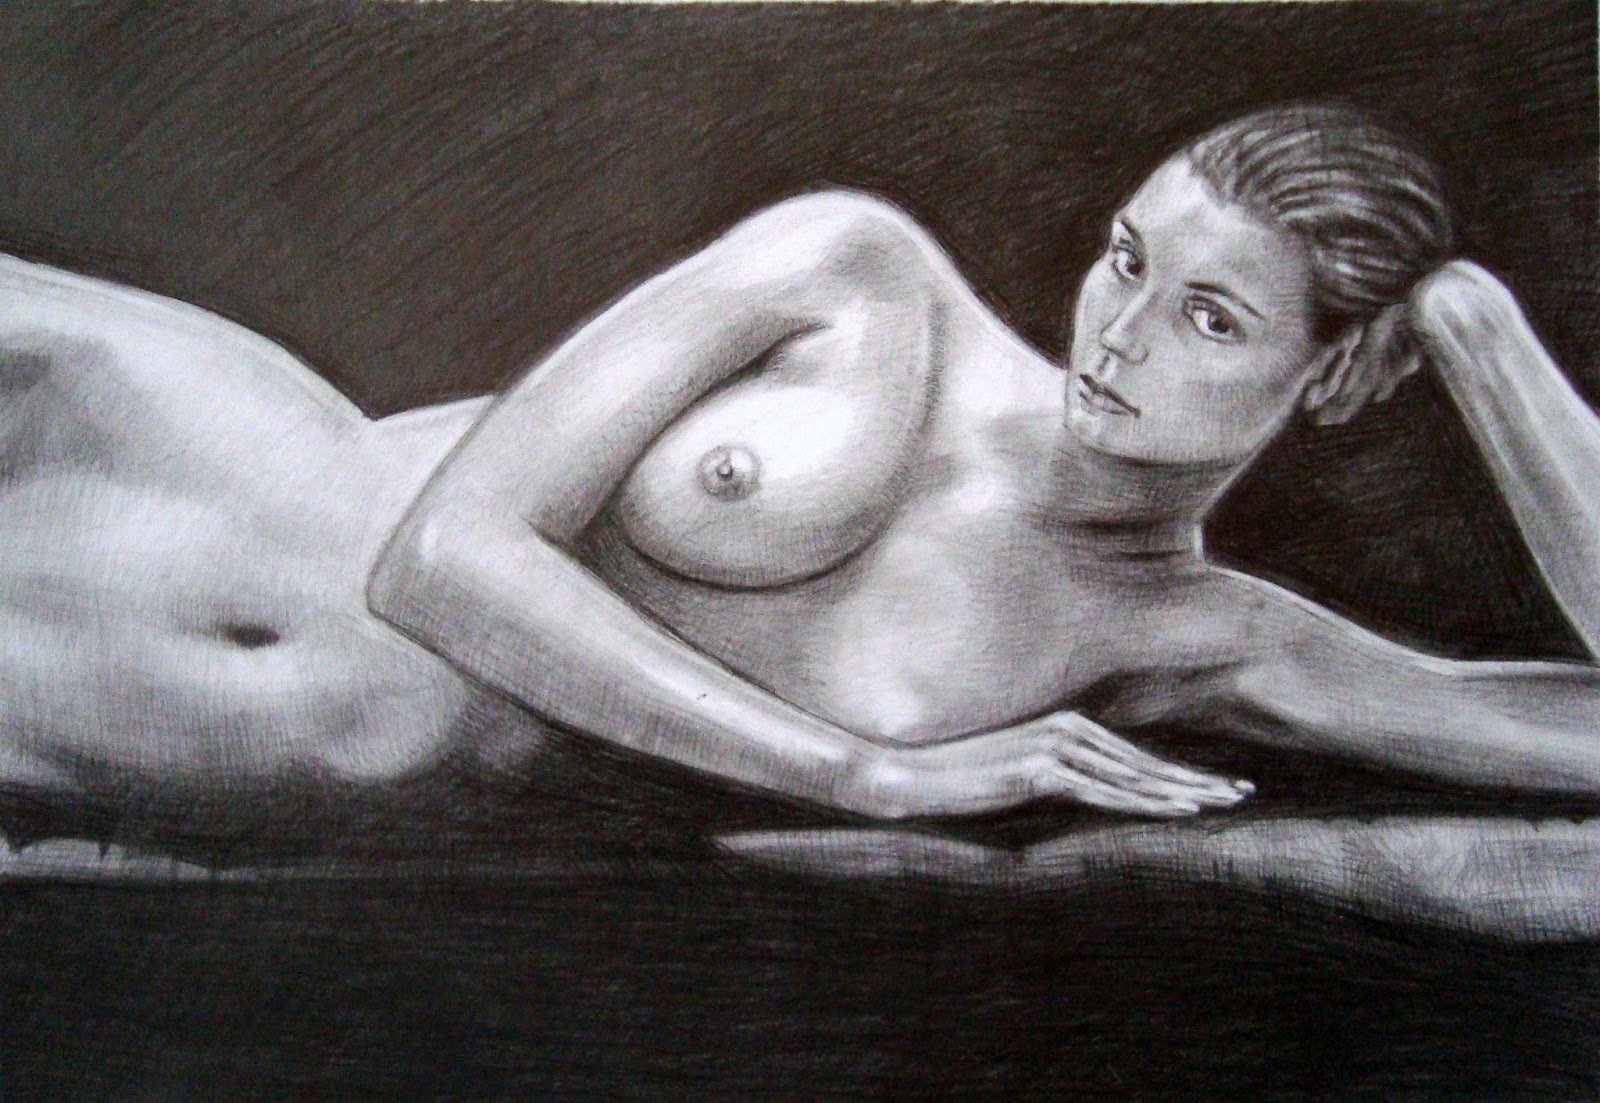 How to draw a naked lady